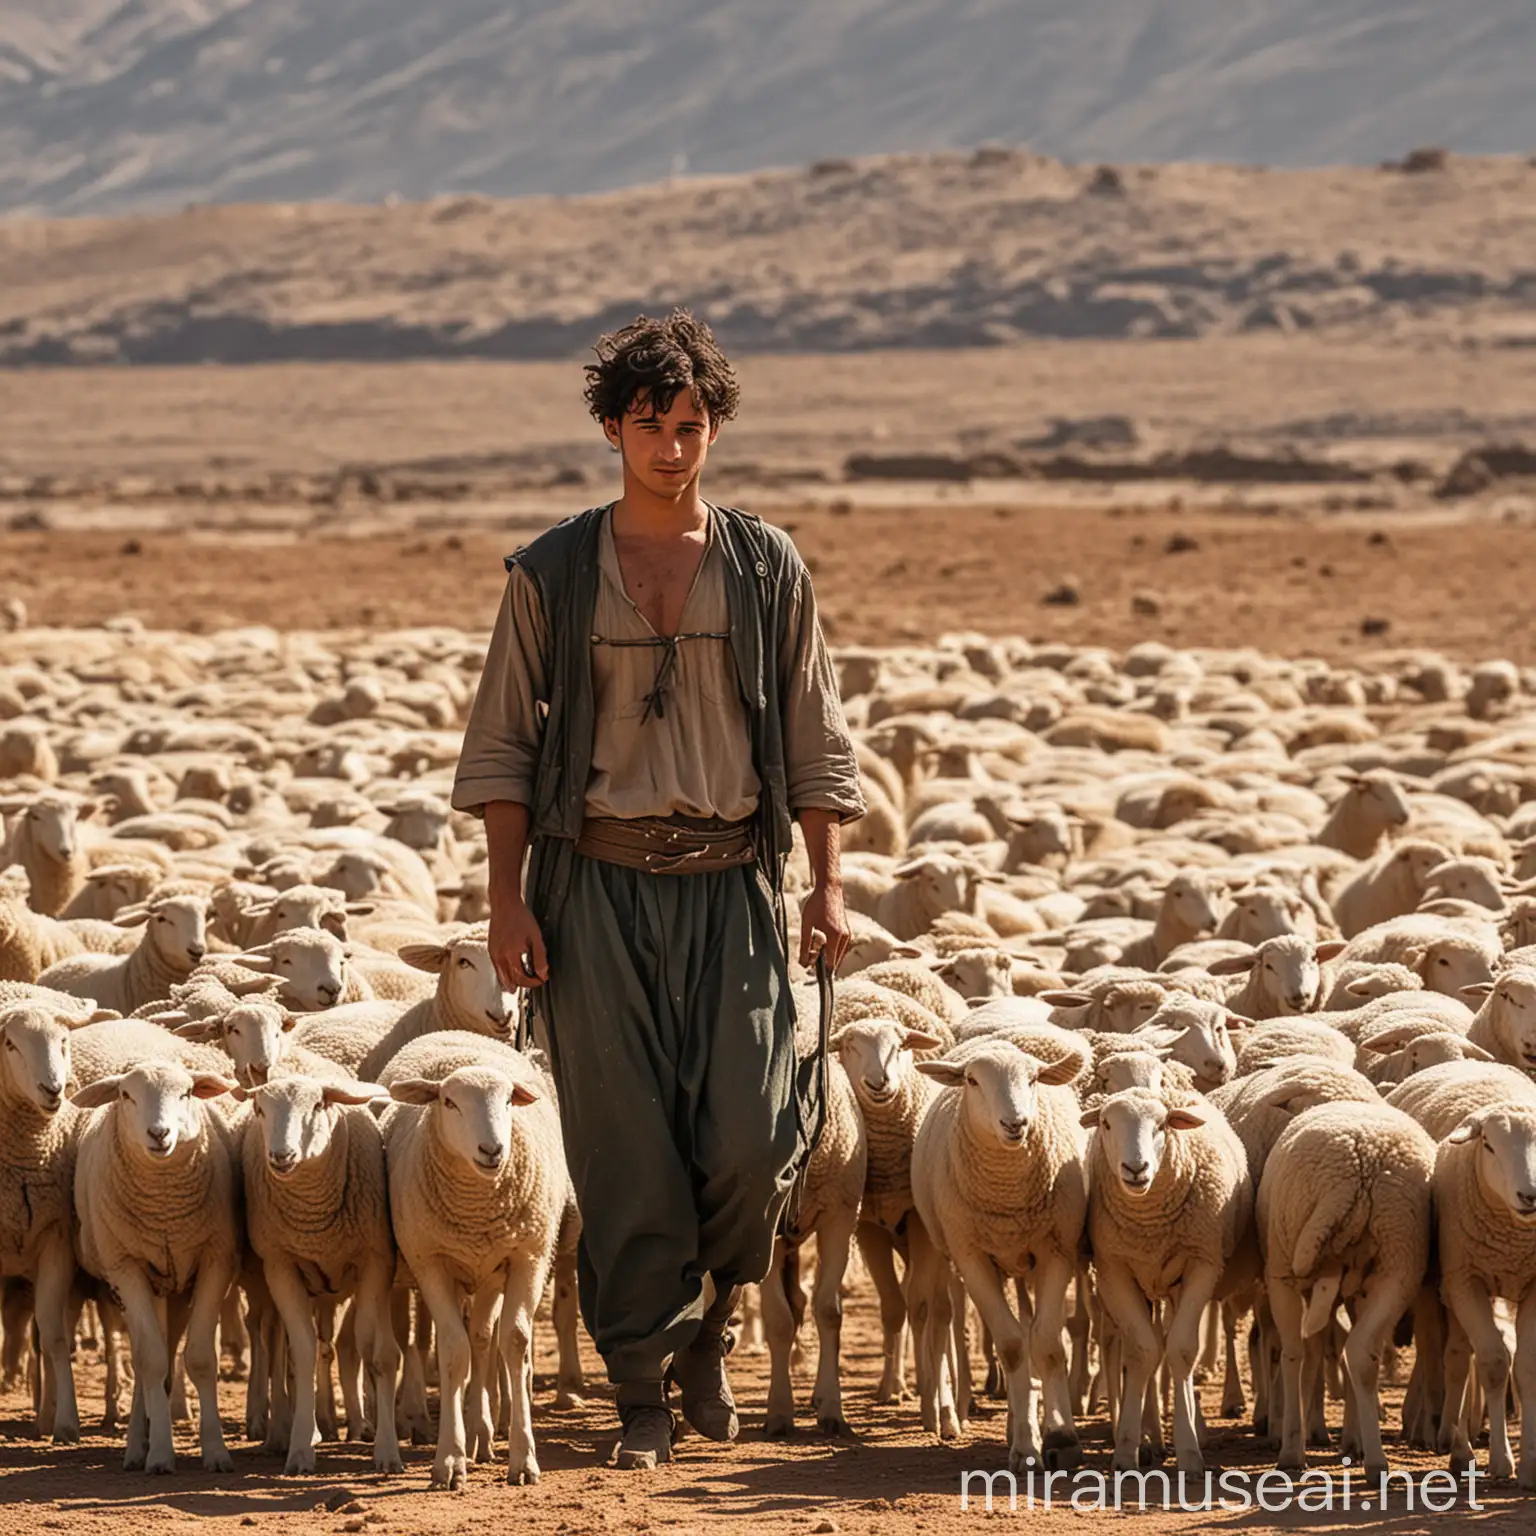 Young Shepherd with Flock of Sheep in Desert Landscape